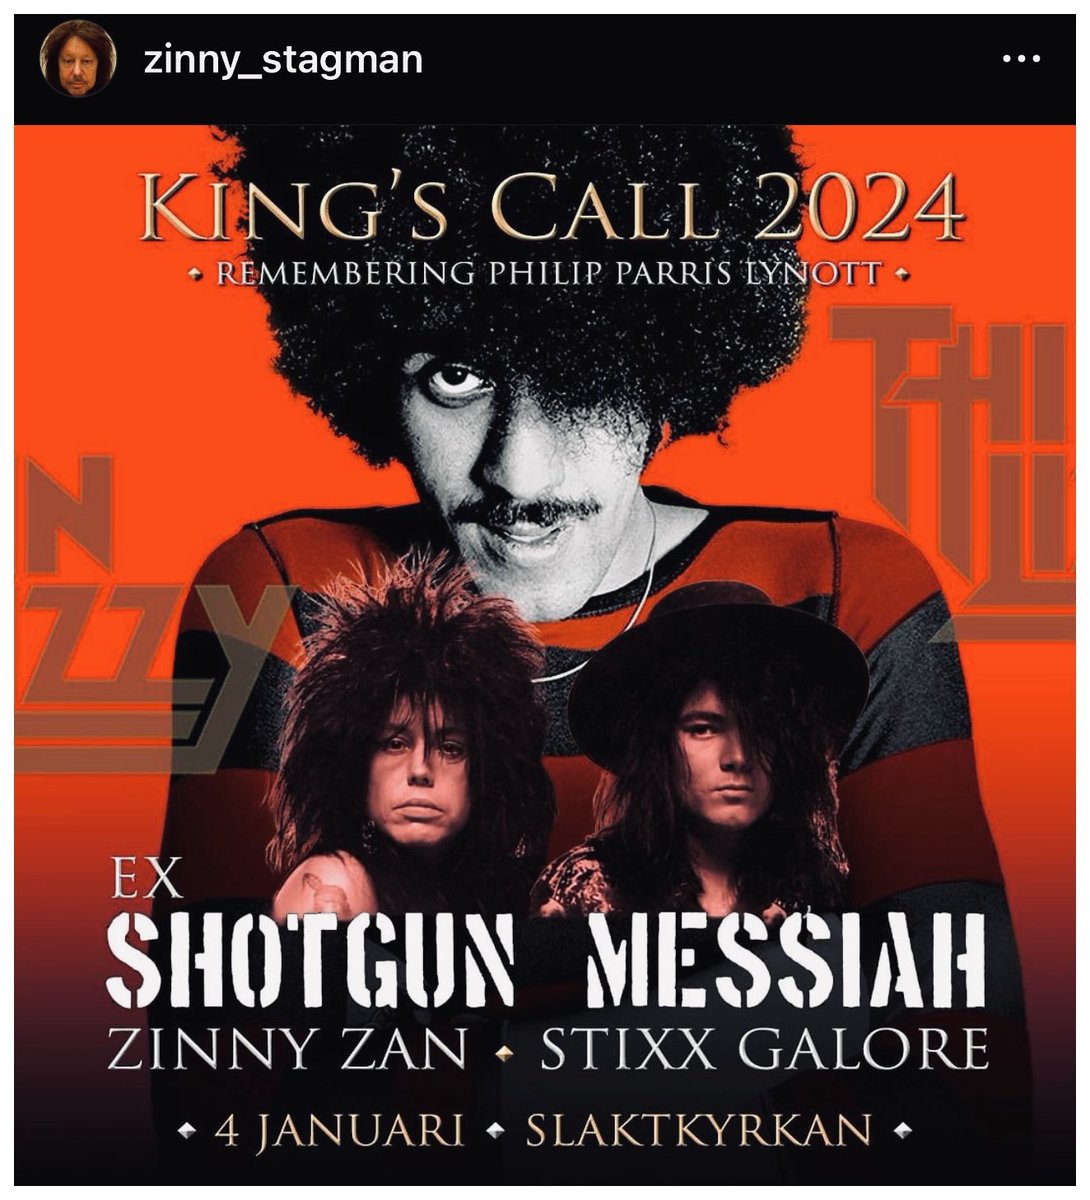 Shotgun Messiah does Thin Lizzy

Coming January 4th to the Slaktkyrkan in Stockholm, Sweden

#livemusic #rock